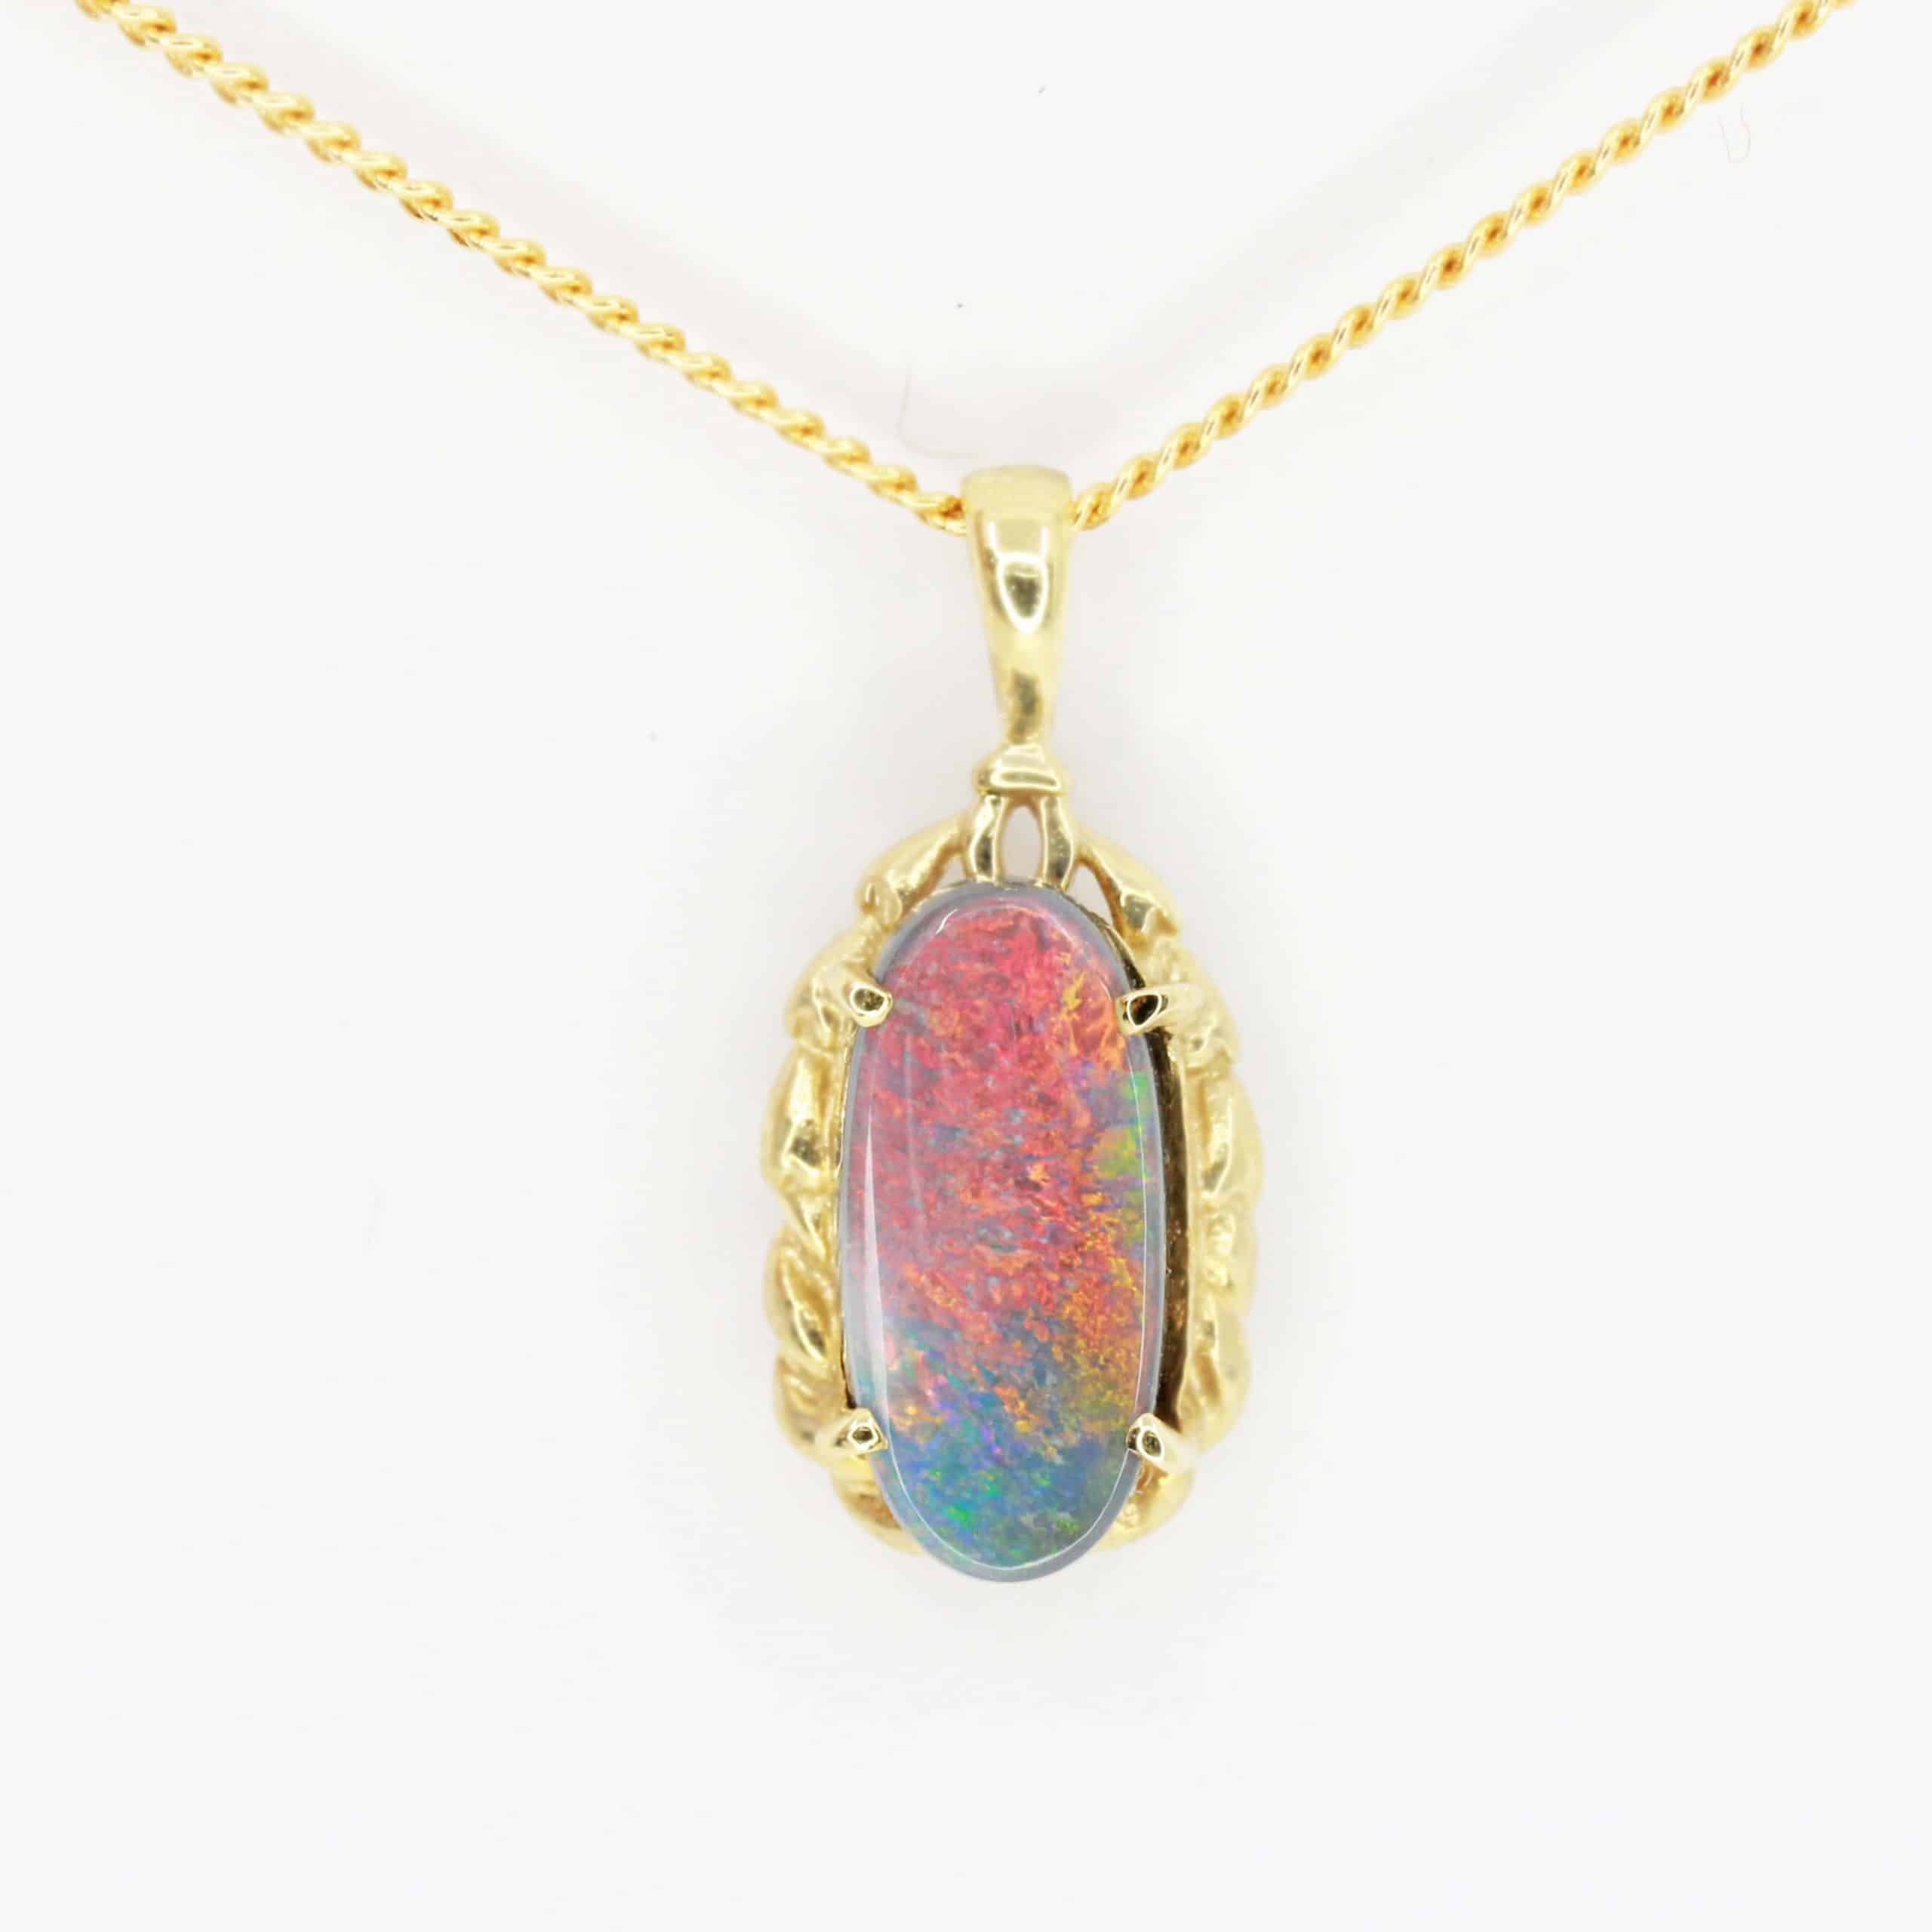 black opal pendant set in 14ct yellow gold by allgem jewellers